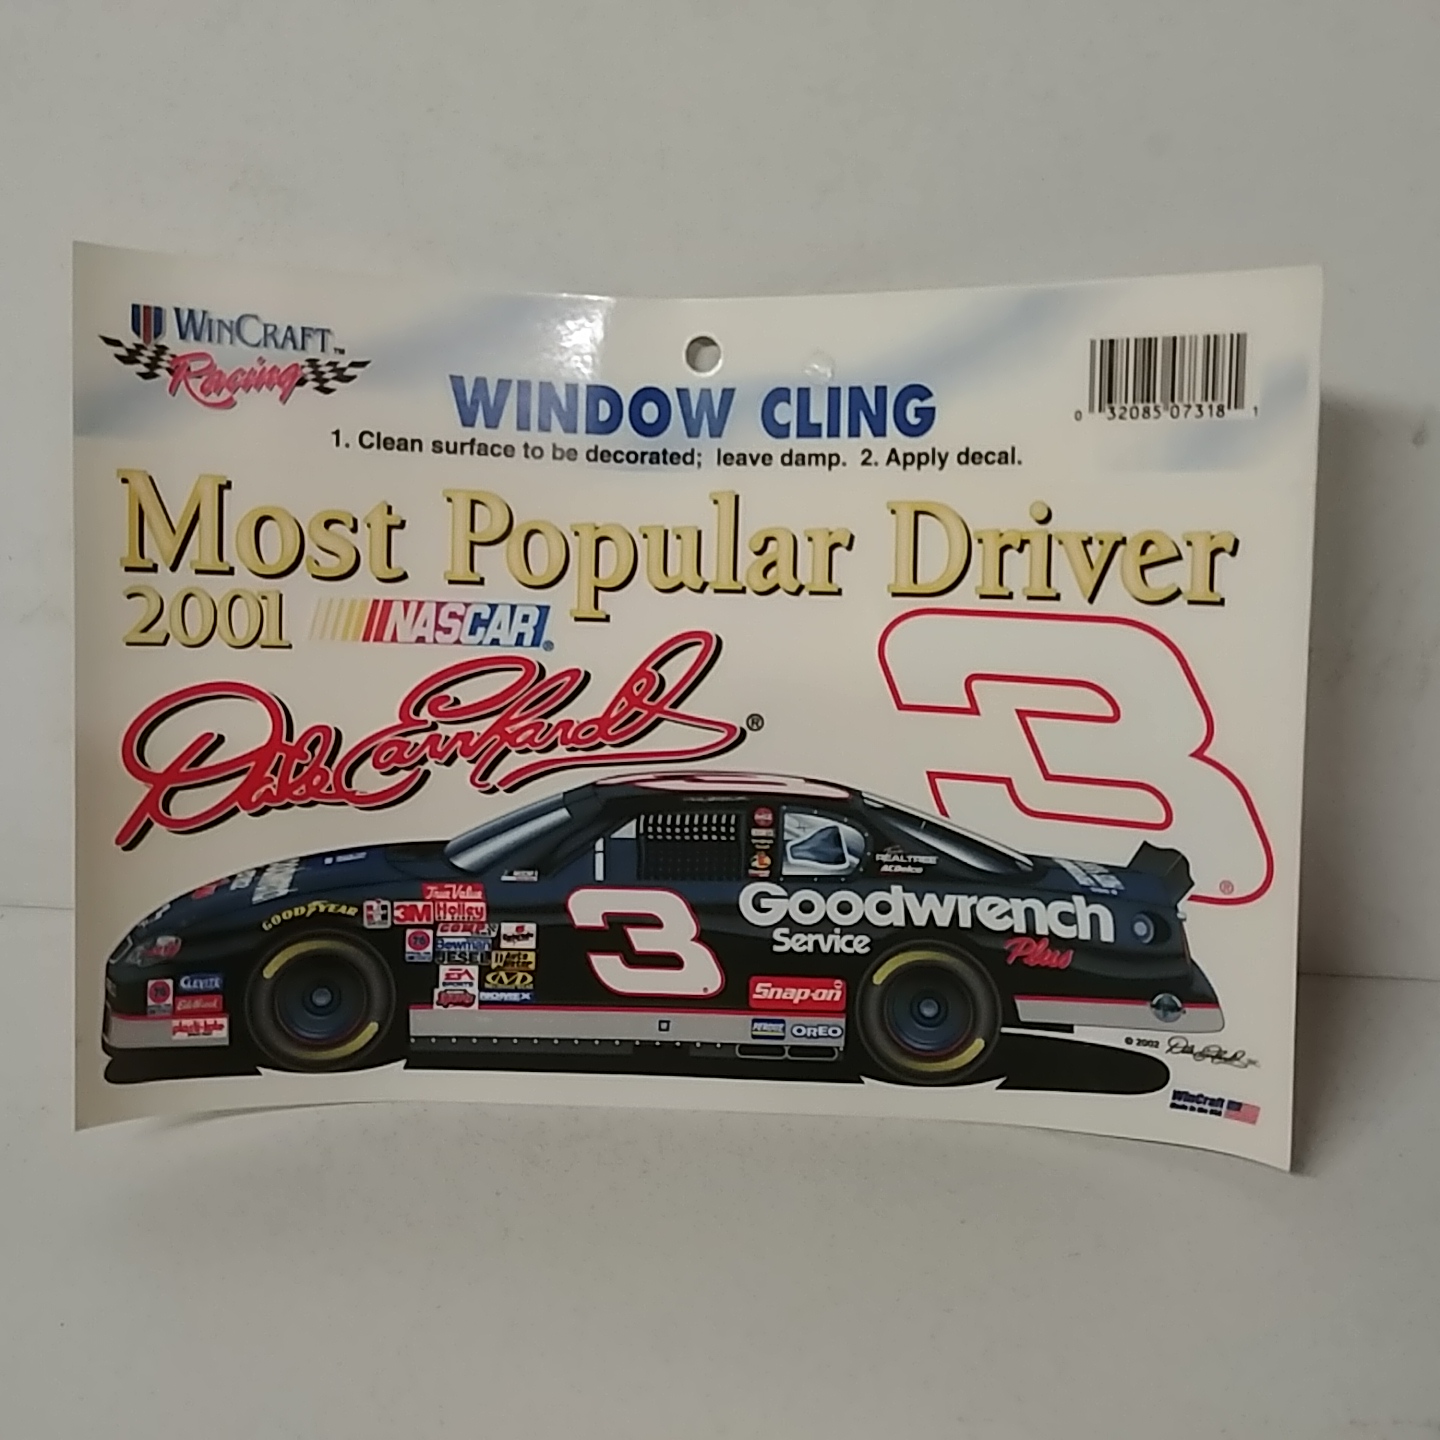 2001 Dale Earnhardt Goodwrench "Most Poplar Driver" window cling